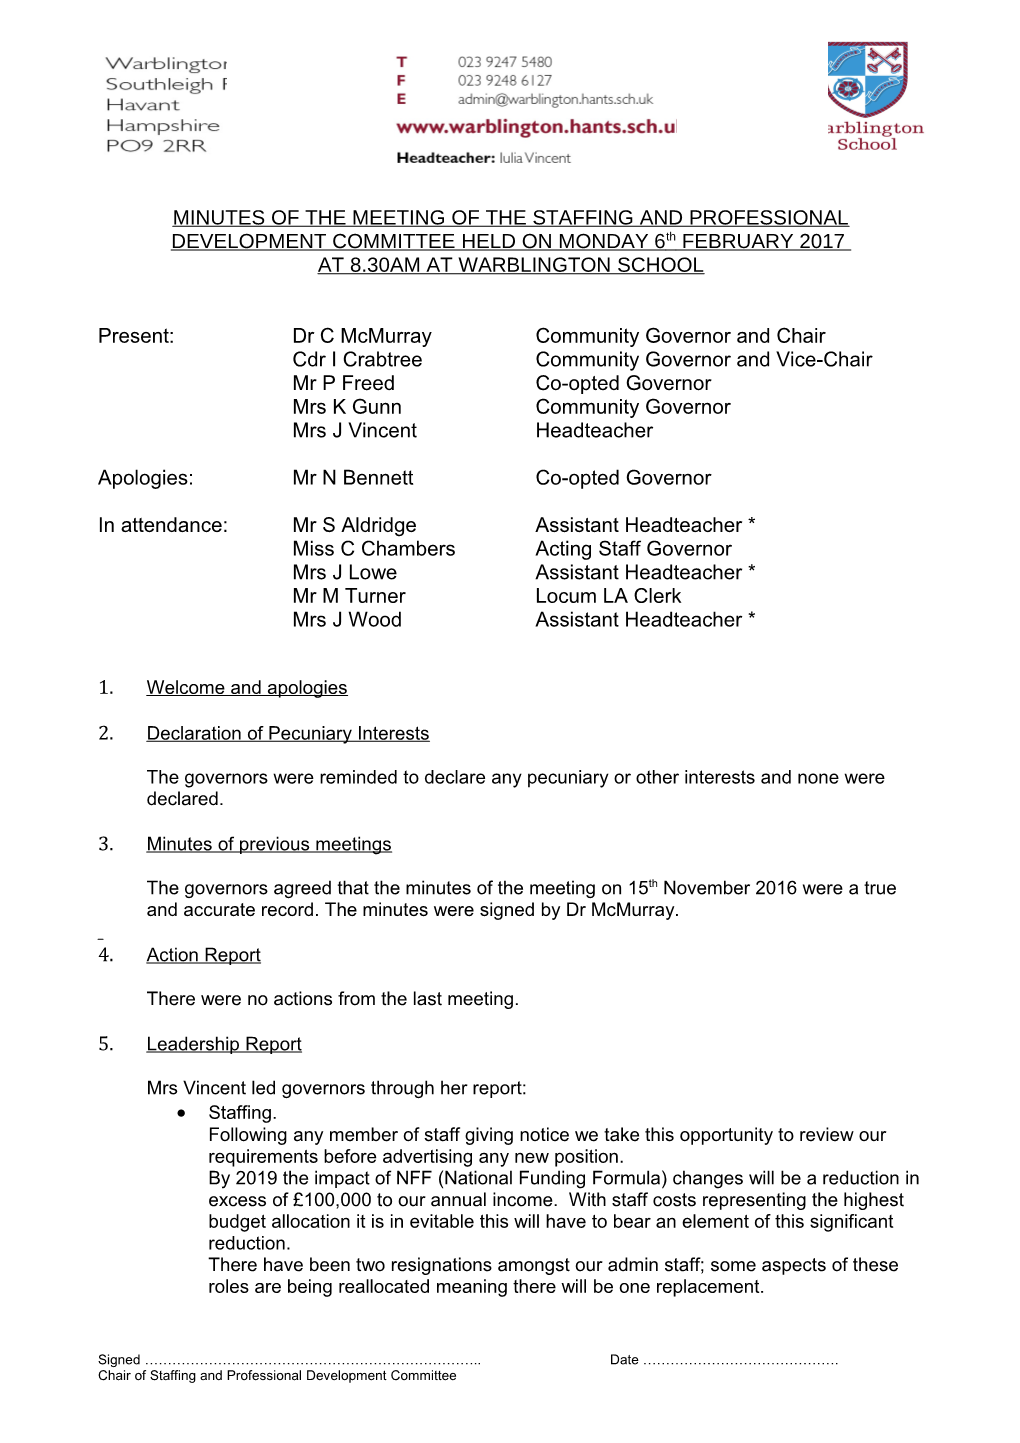 Warblington School Staffing and Professional Development Committee - Minutes of Meeting